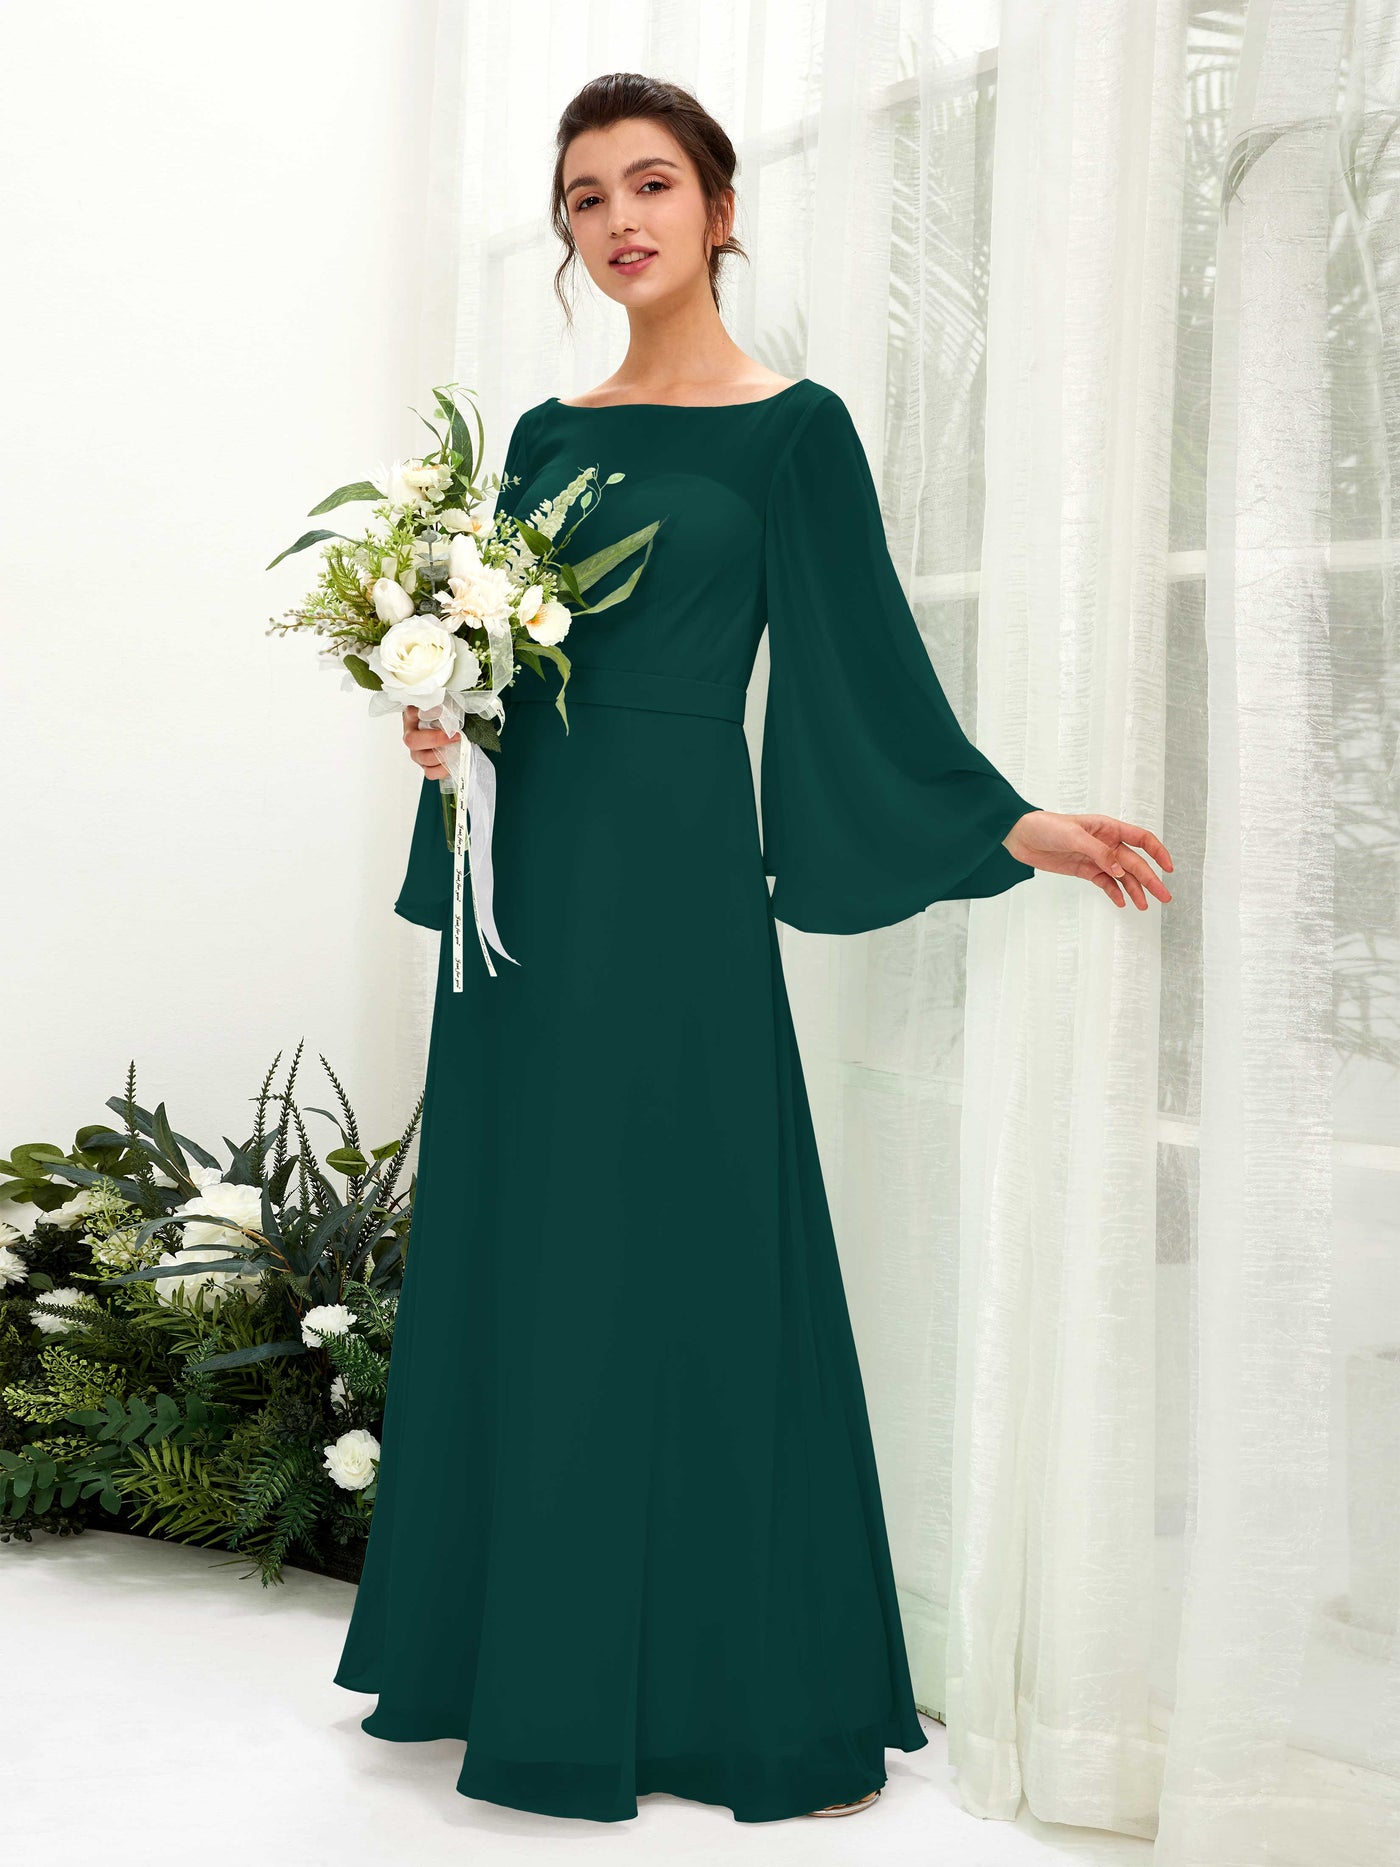 Mermaid Plus Size Emerald Green Bridesmaid Dresses,PD221571 · lovebridal ·  Online Store Powered by Storenvy